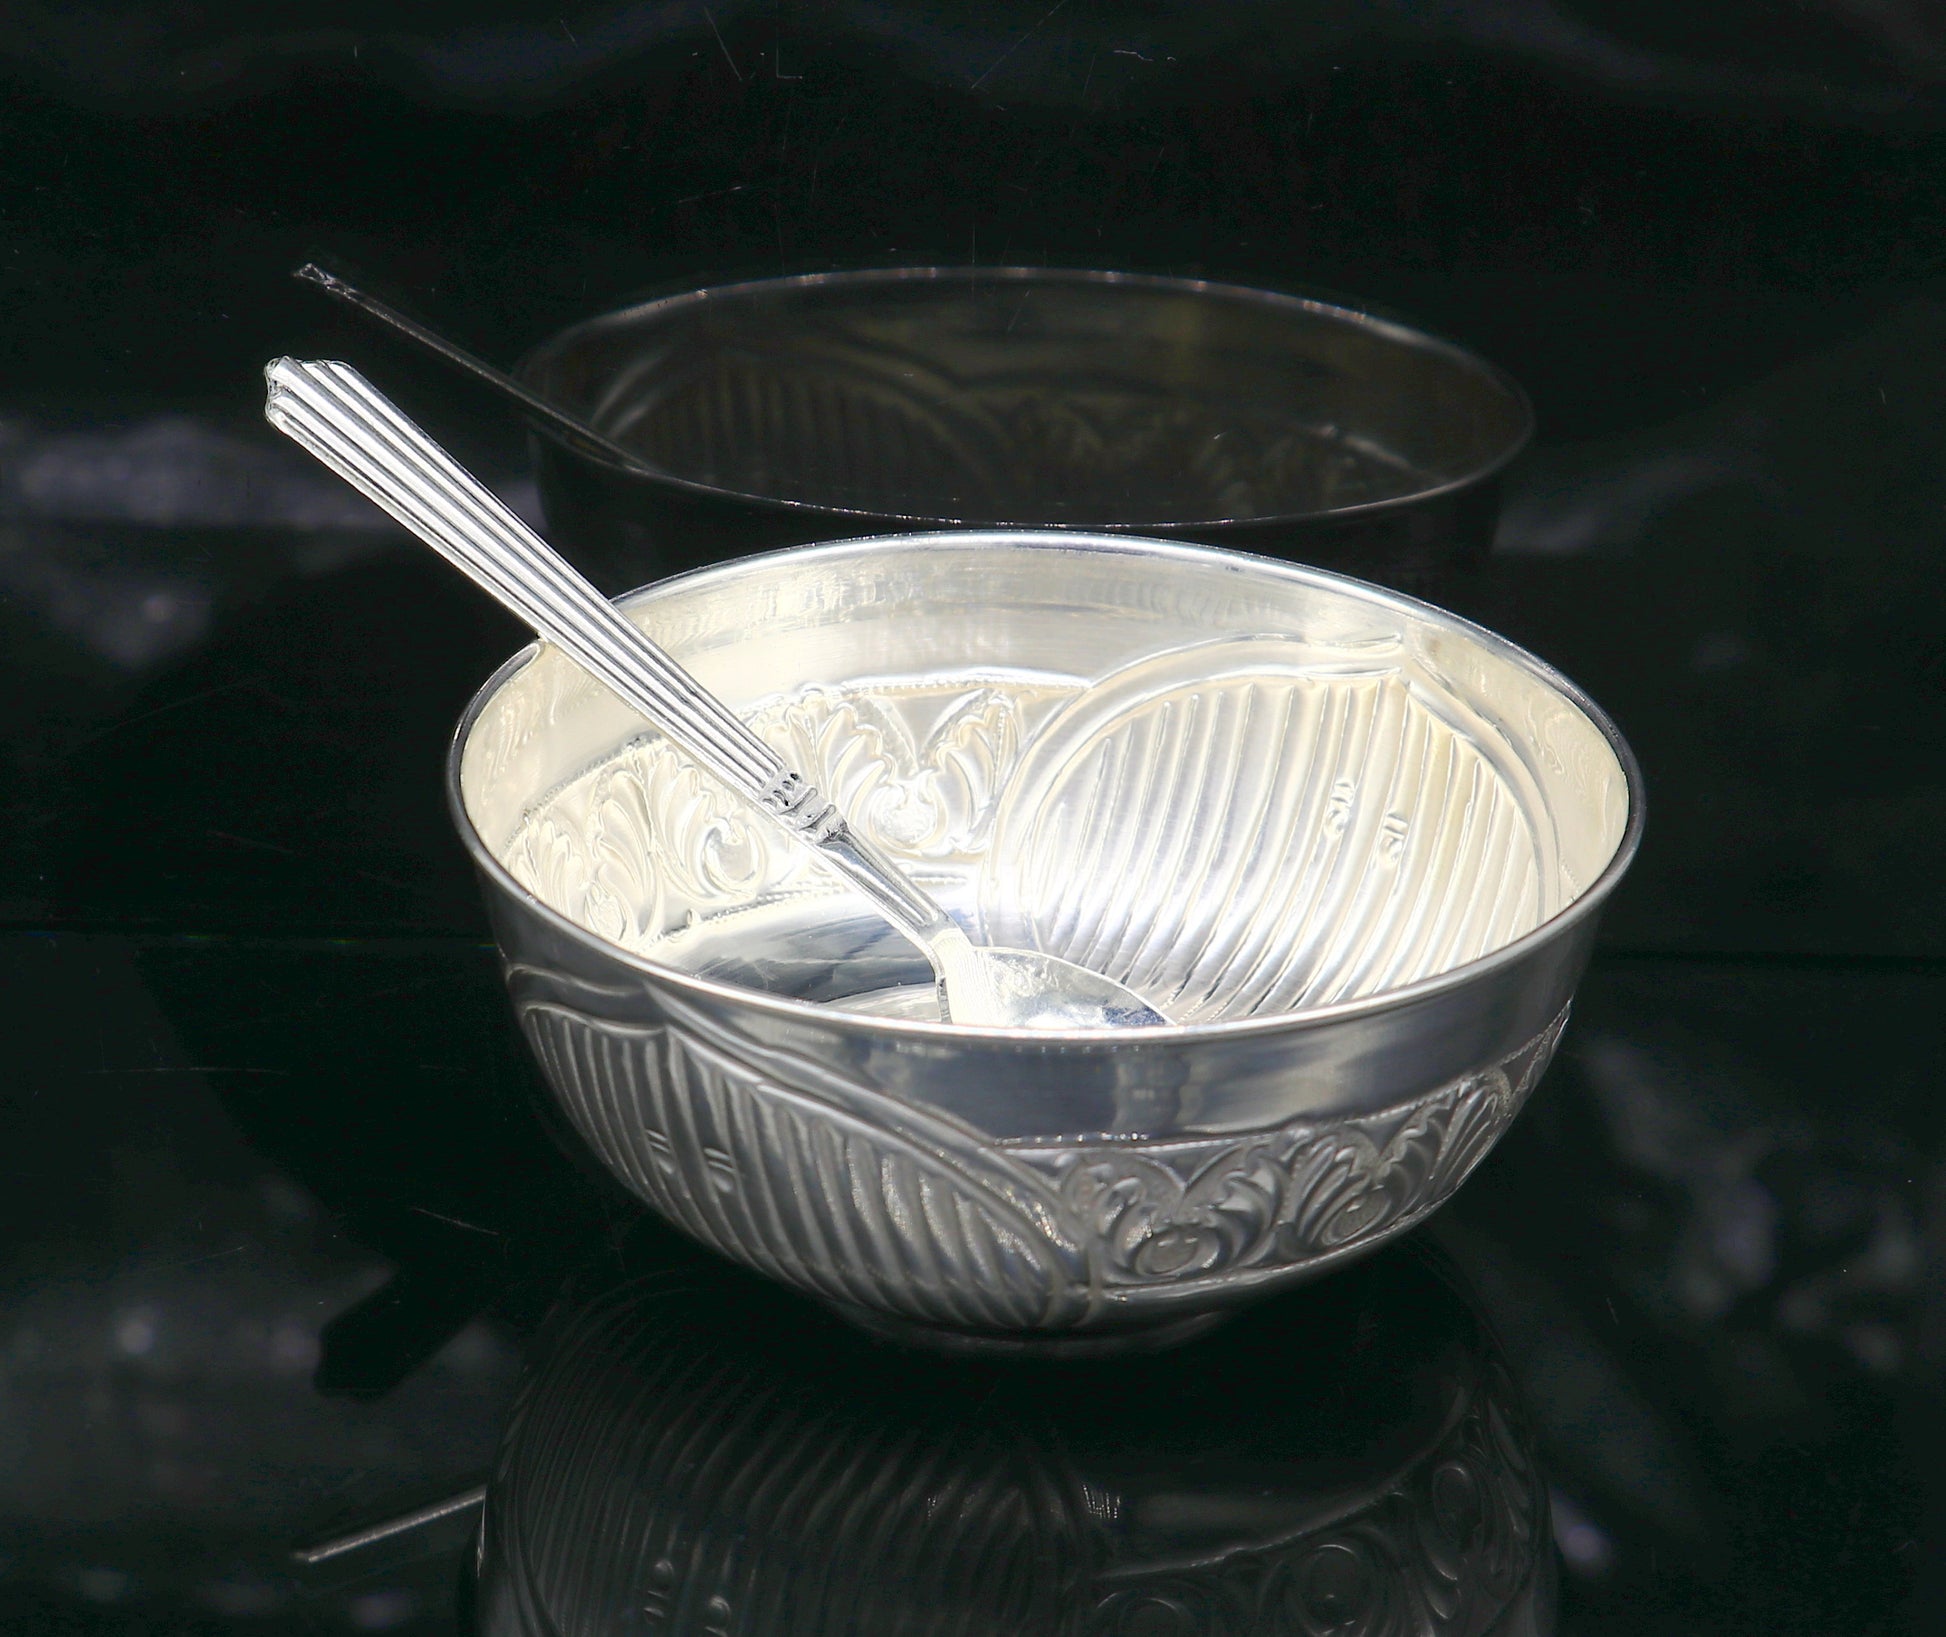 Silver Bowl & Spoon for new born baby - Bis hallmark –